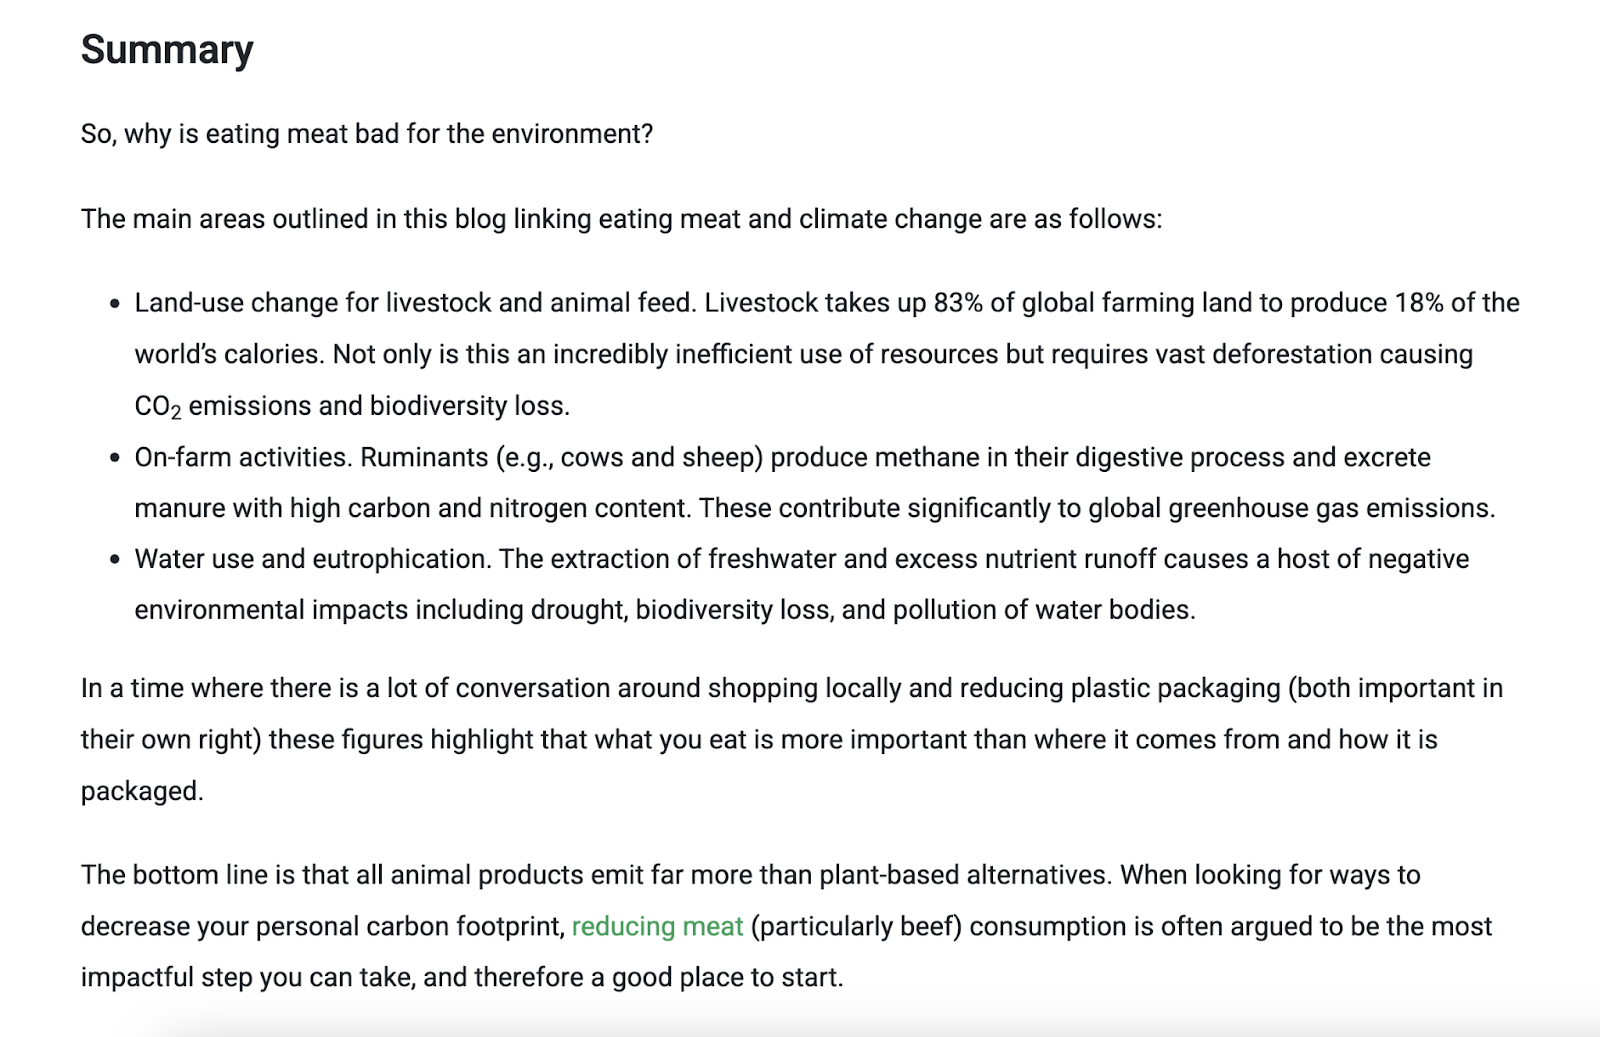 Summary section of Green Element's article on meat impact consumption on the environment